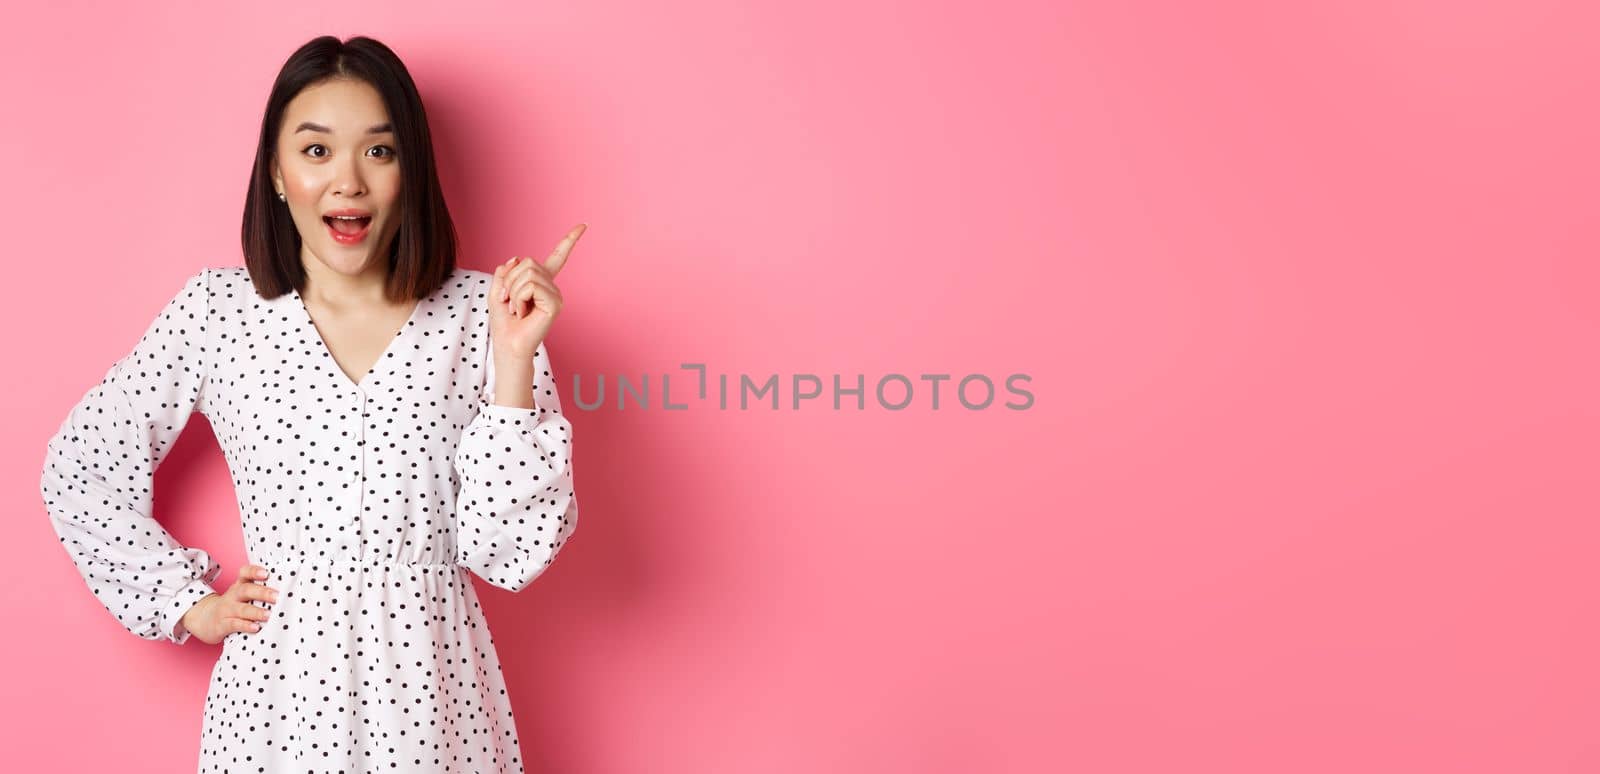 Excited pretty asian girl pointing at upper right corner, gasping amazed and looking at camera, discuss store promo offer, standing over pink background.